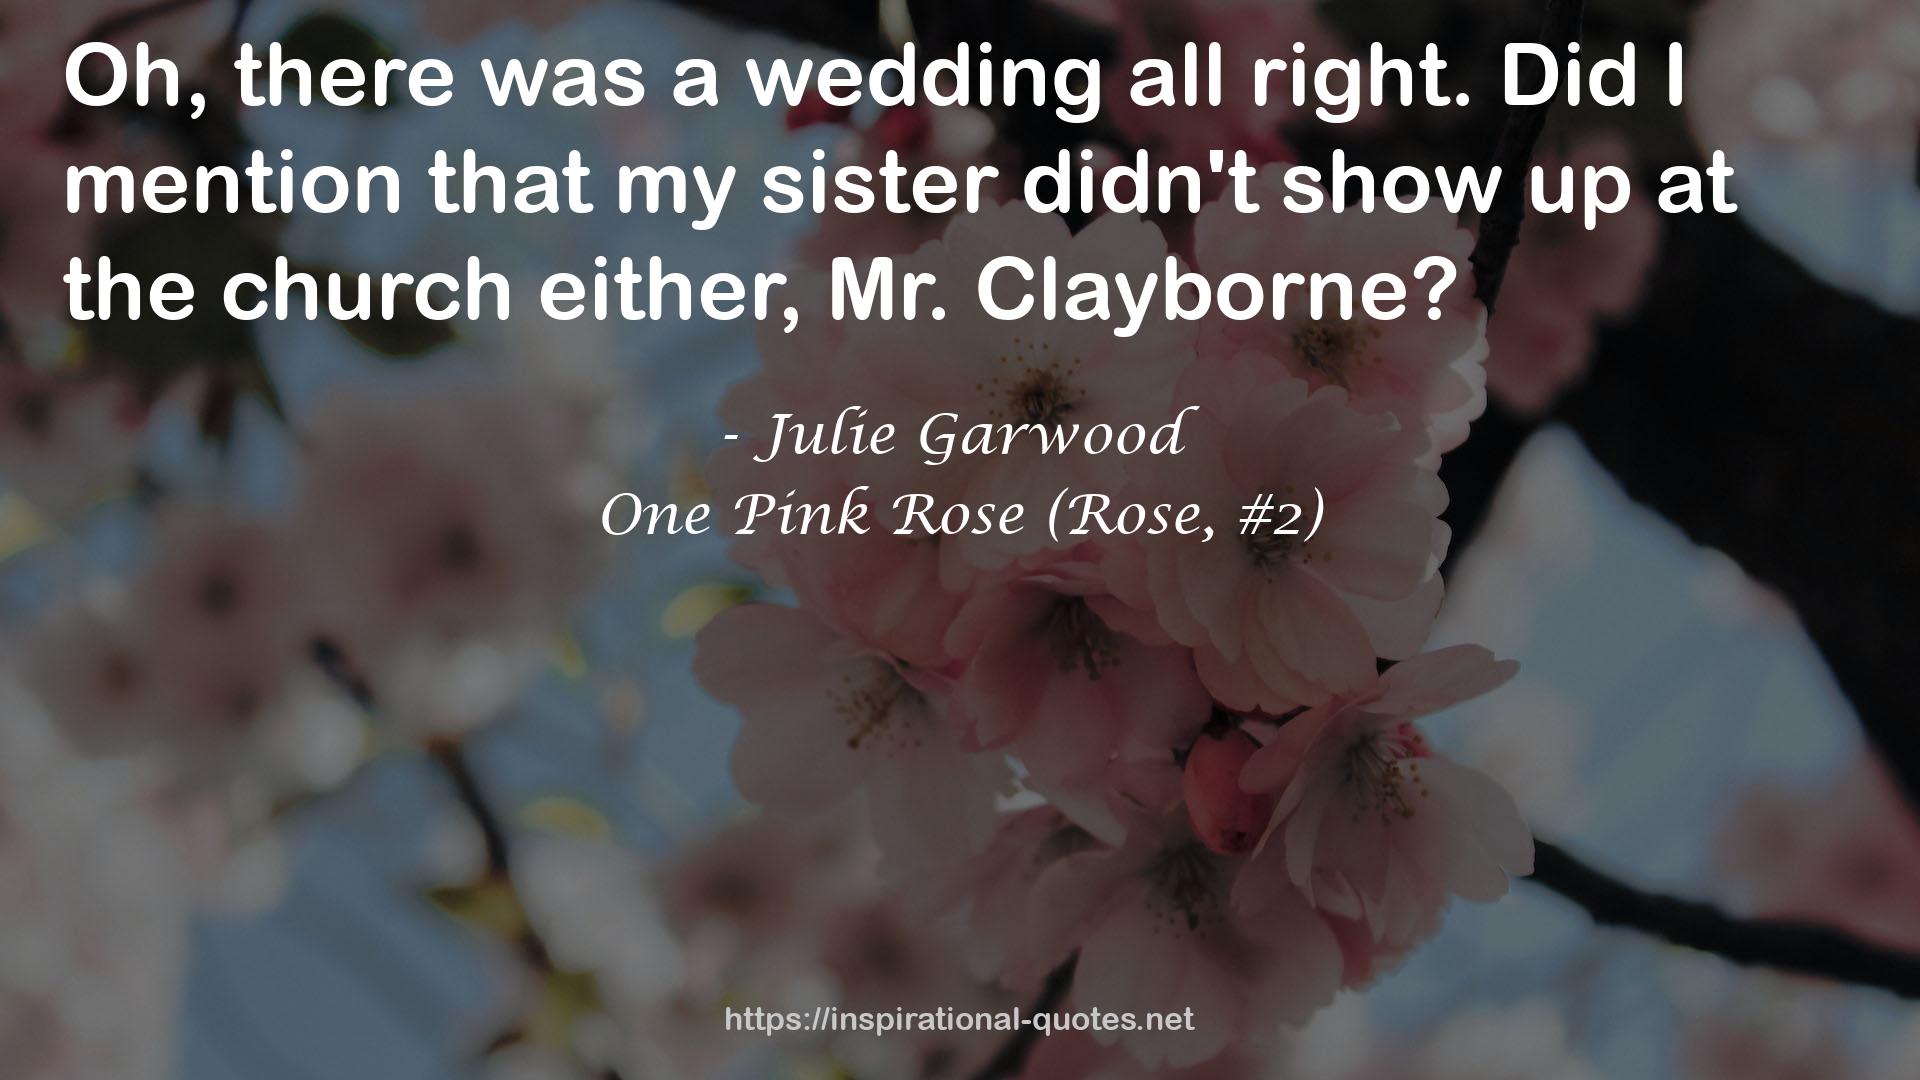 One Pink Rose (Rose, #2) QUOTES